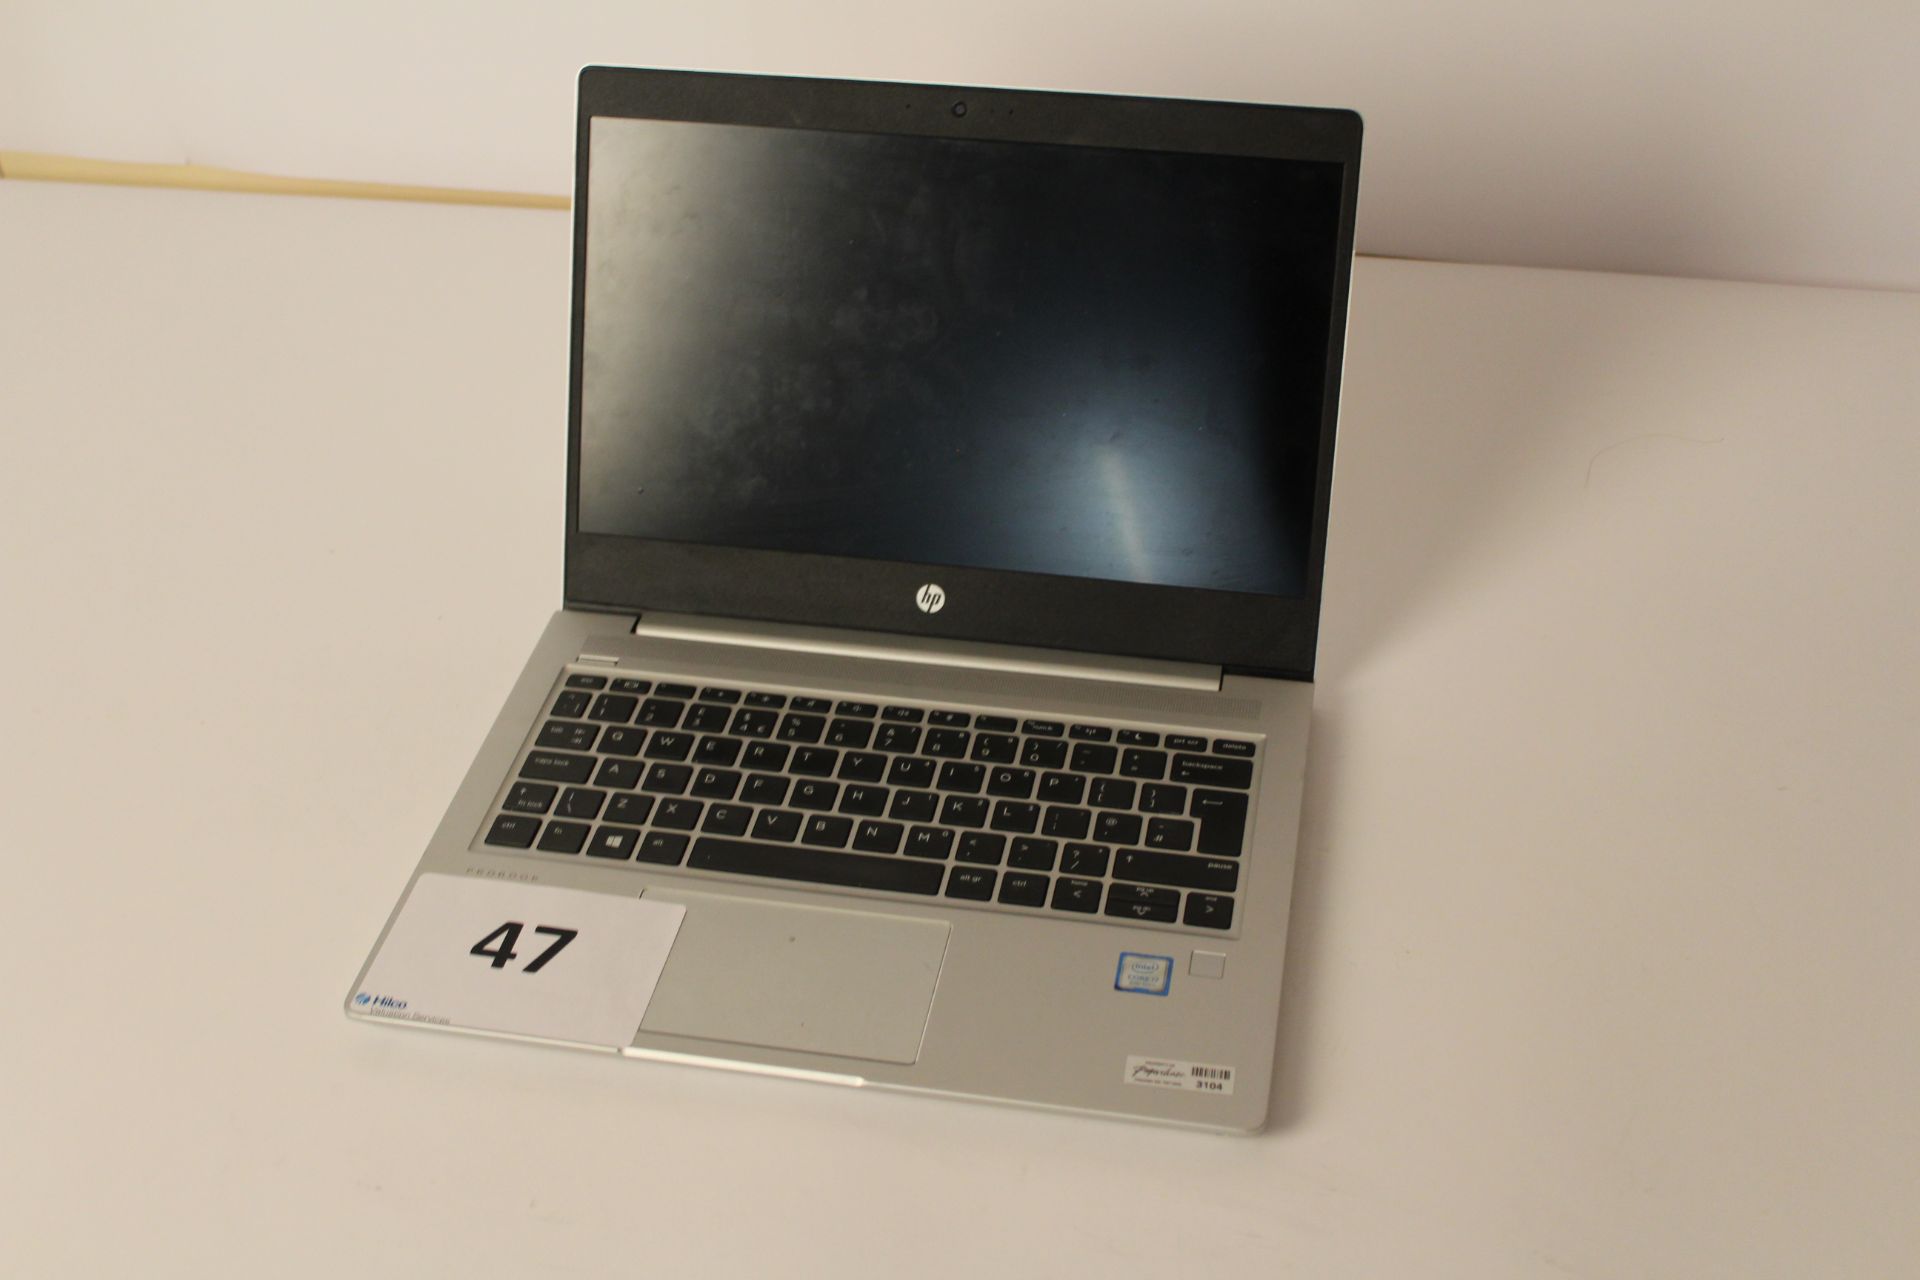 HP ProBook 430 G6 Core i7 Laptop Computer, S/N 5CD0117R18. No charger